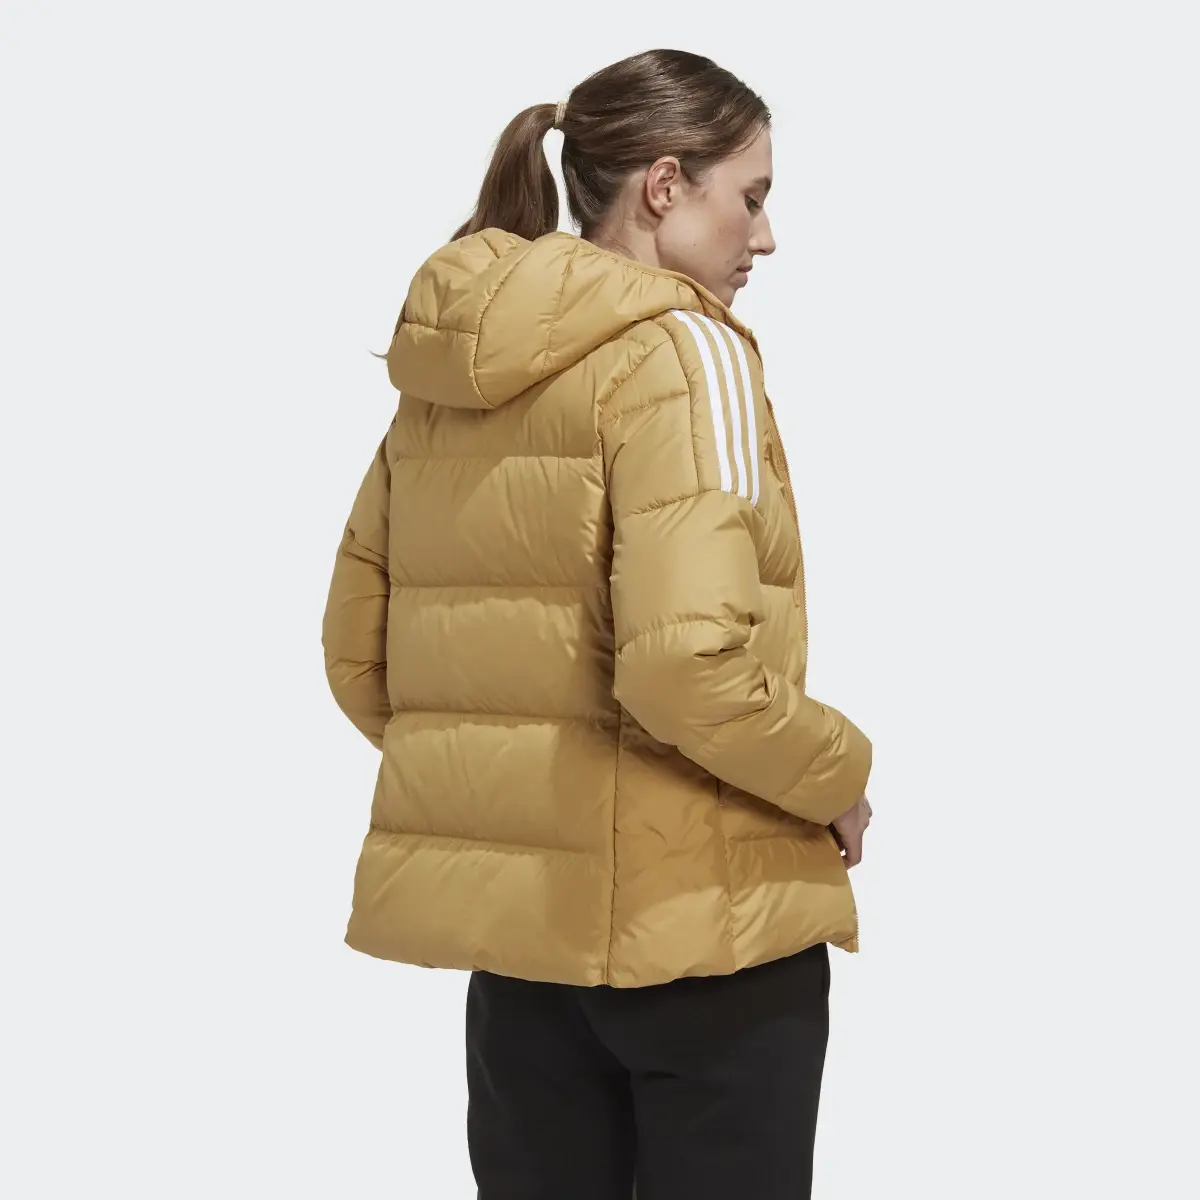 Adidas Essentials Midweight Down Hooded Jacket. 3